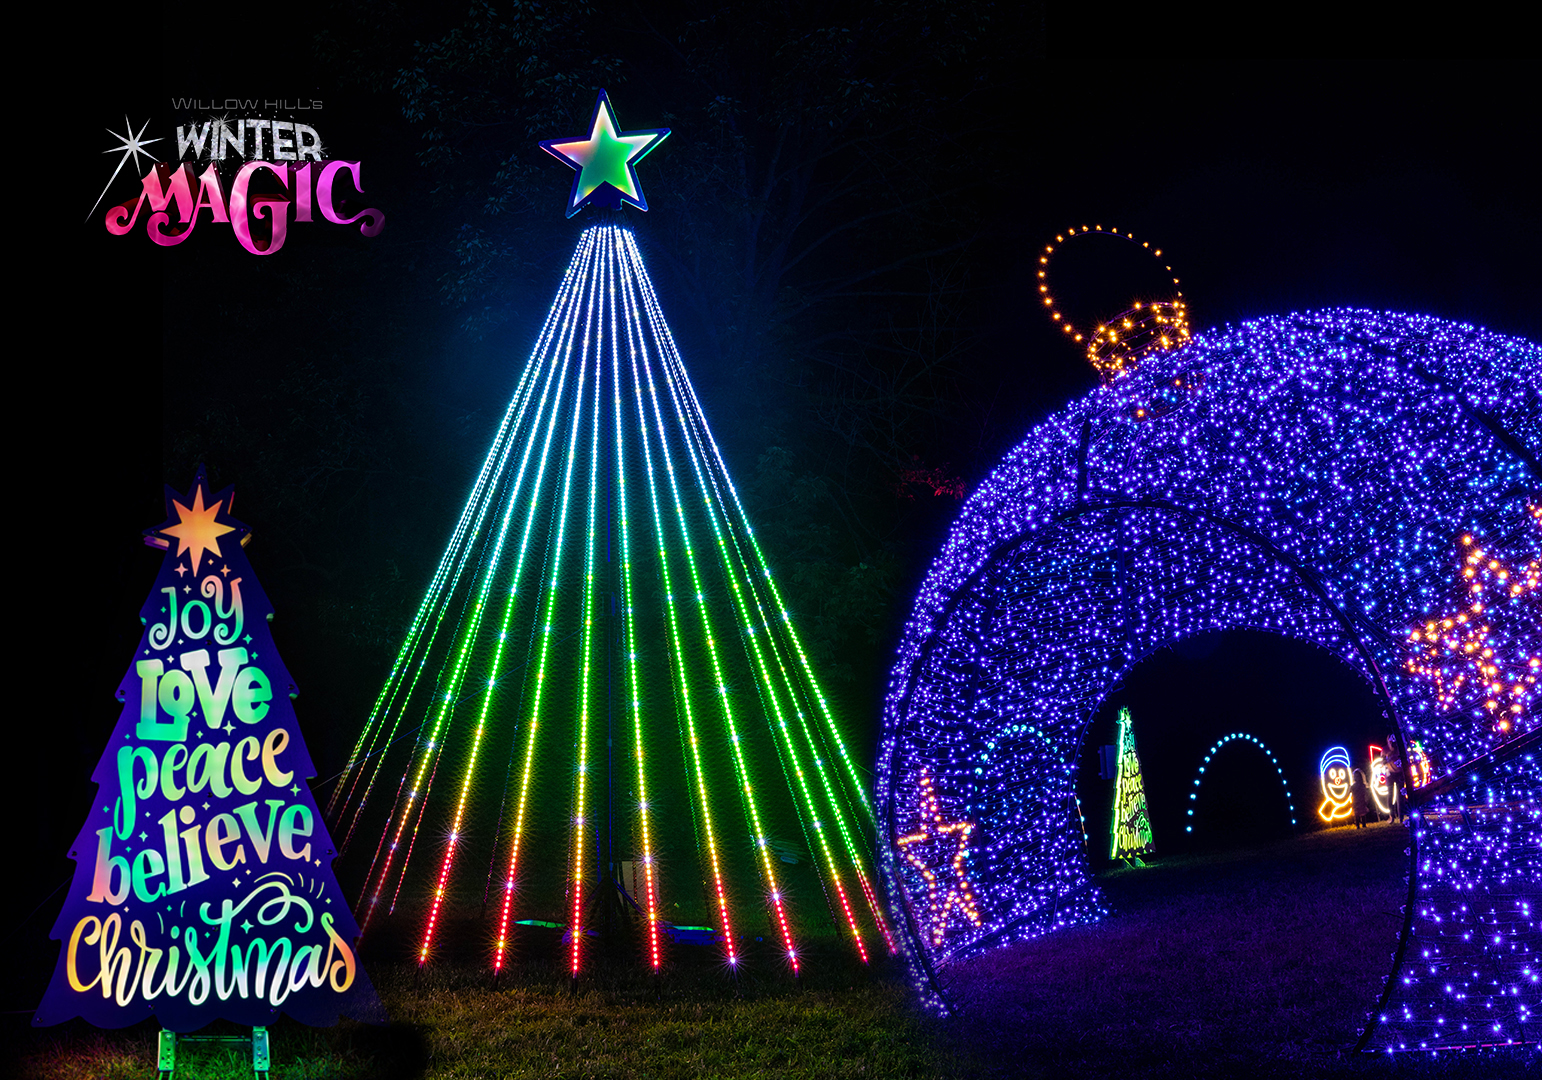 Willow Hill’s Winter Magic | A Drive-Thru Christmas Lights Experience